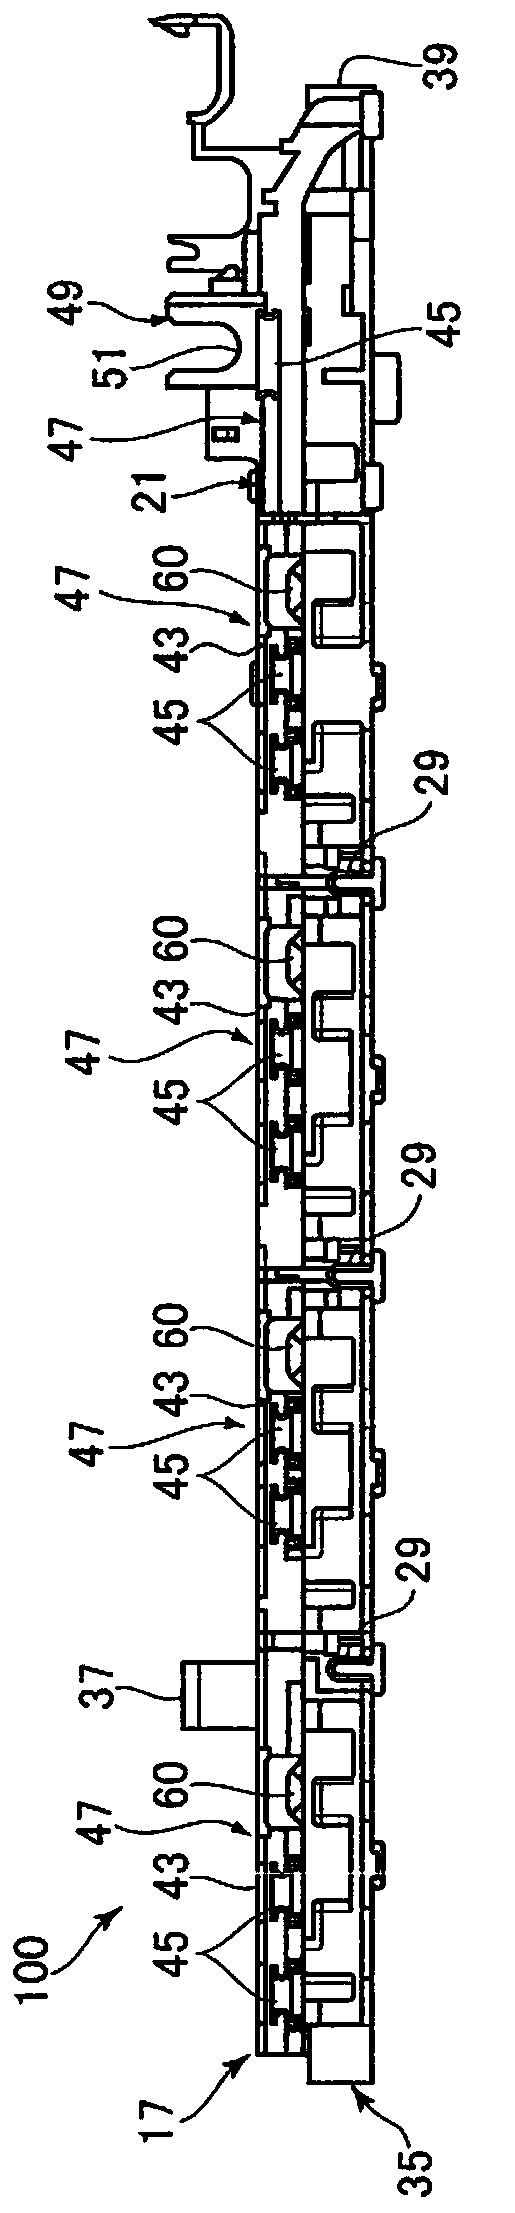 Wire routing structure and busbar module